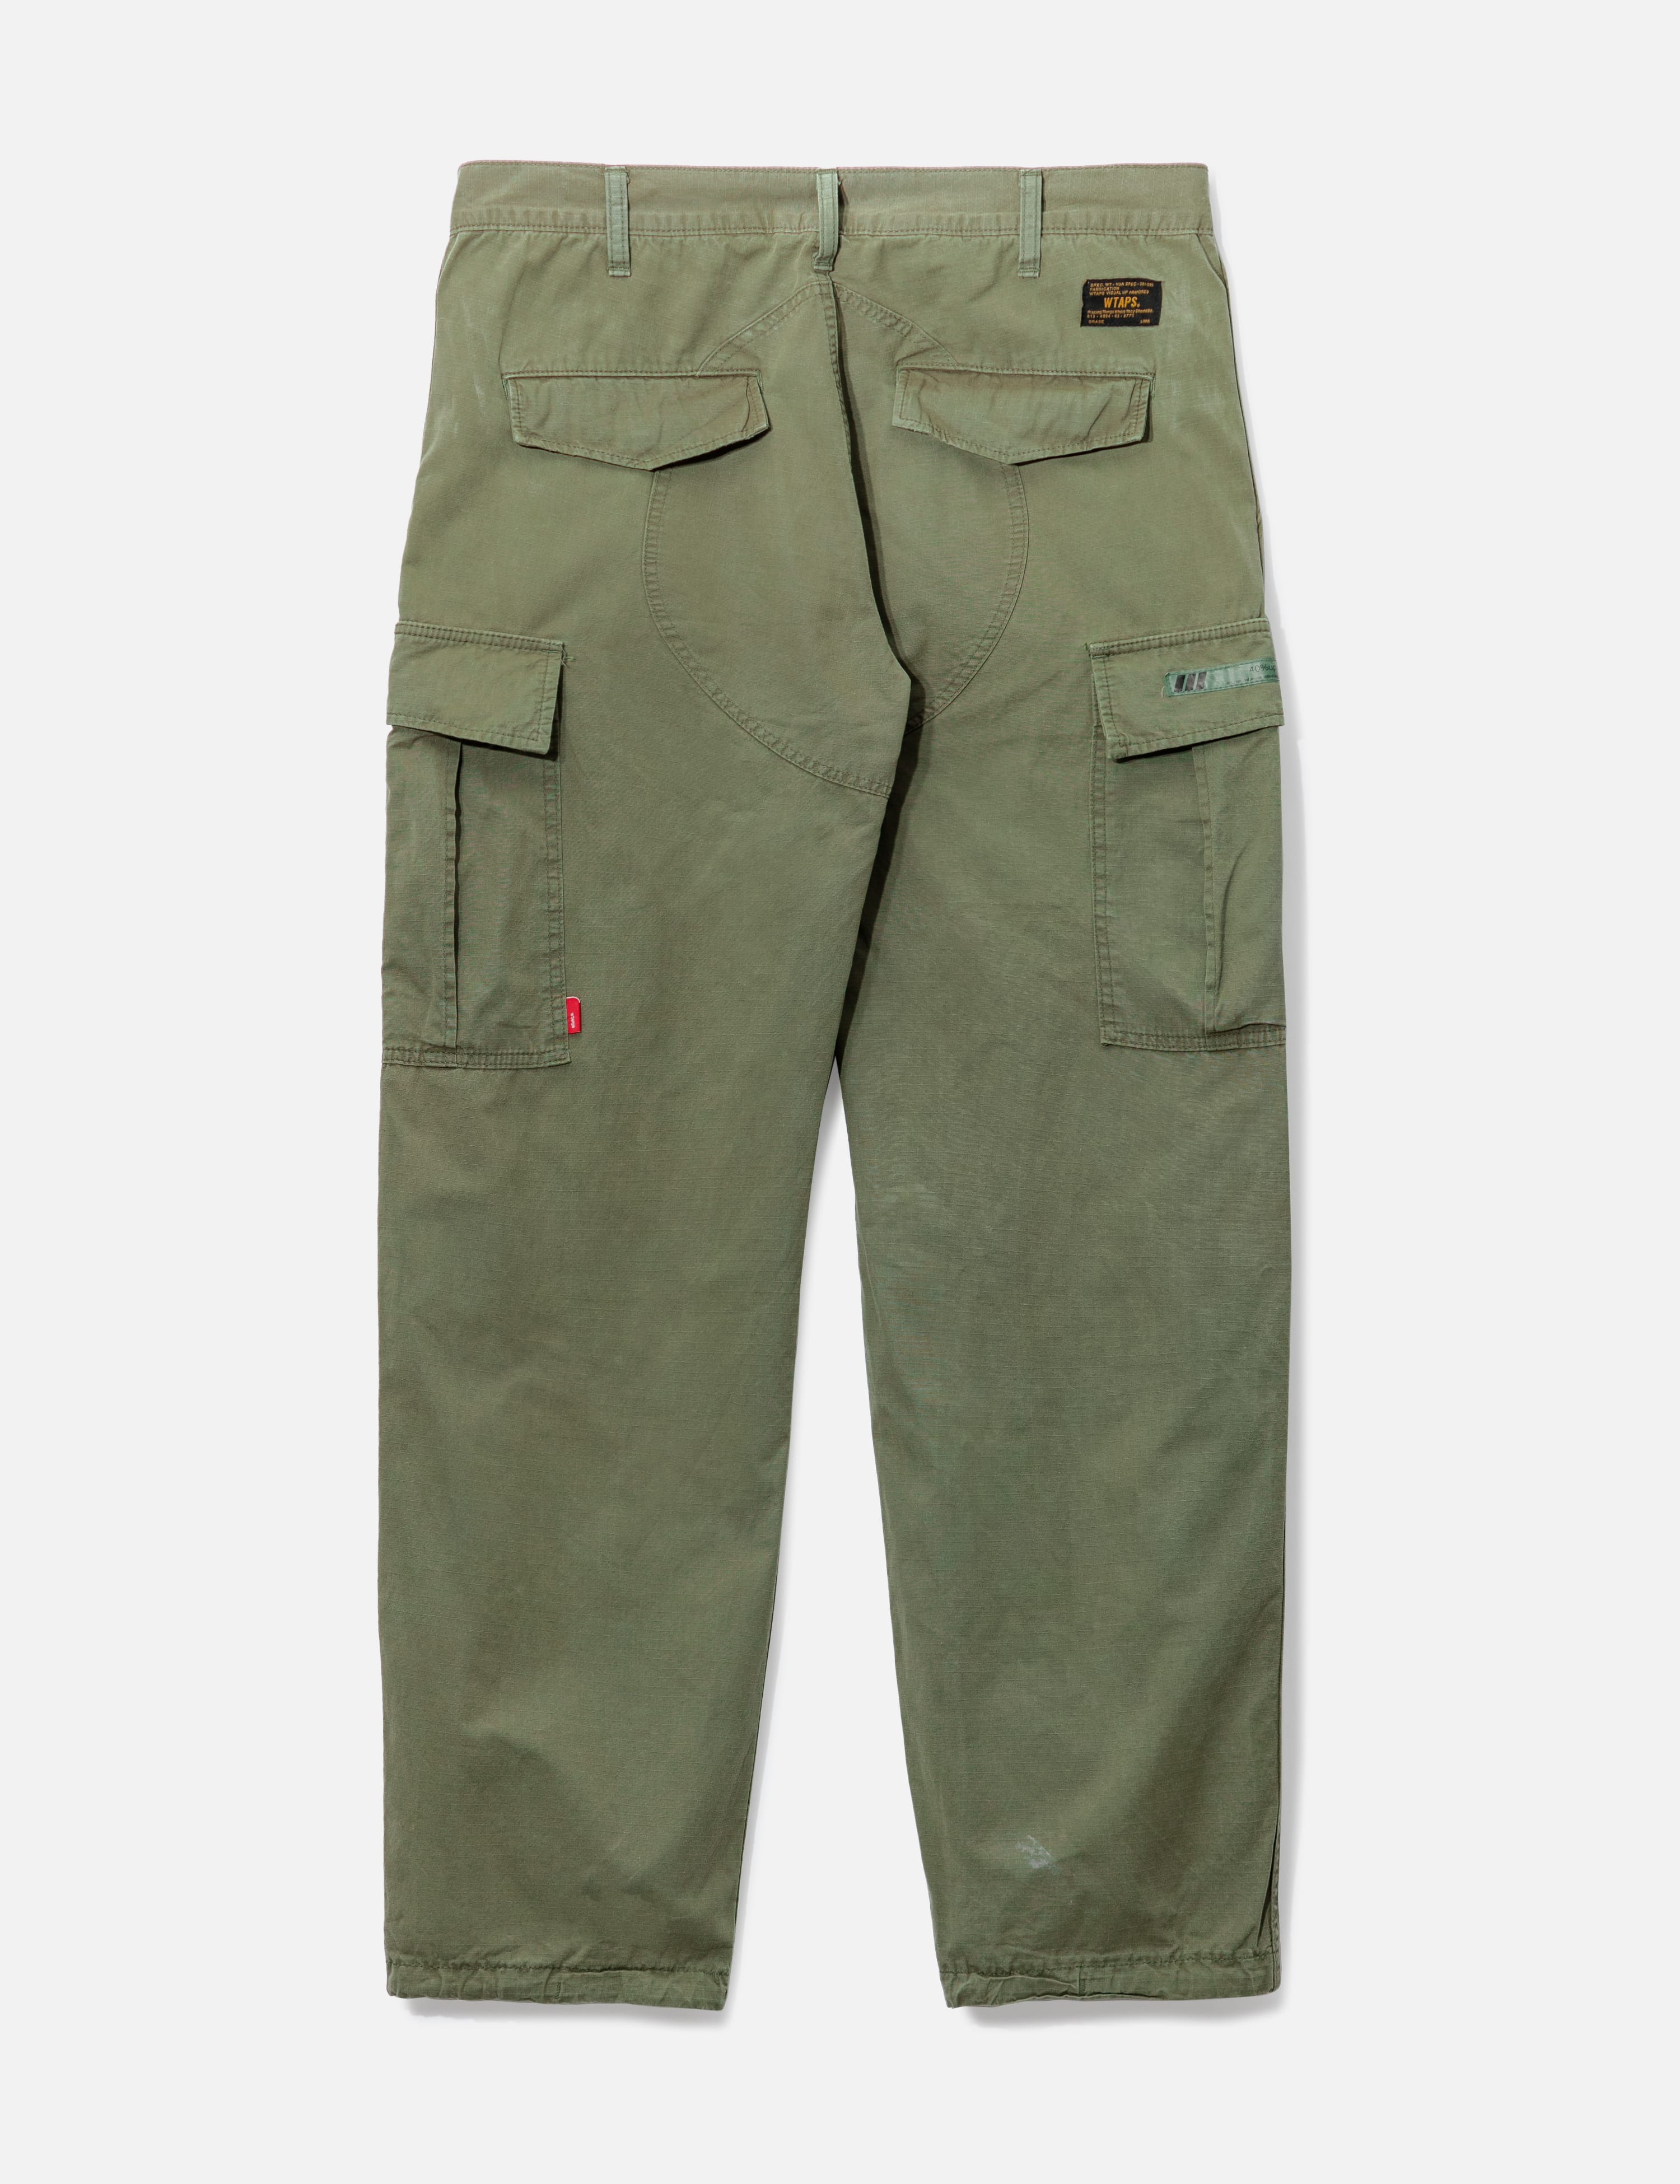 WTAPS - WTAPS CARGO PANTS | HBX - Globally Curated Fashion and